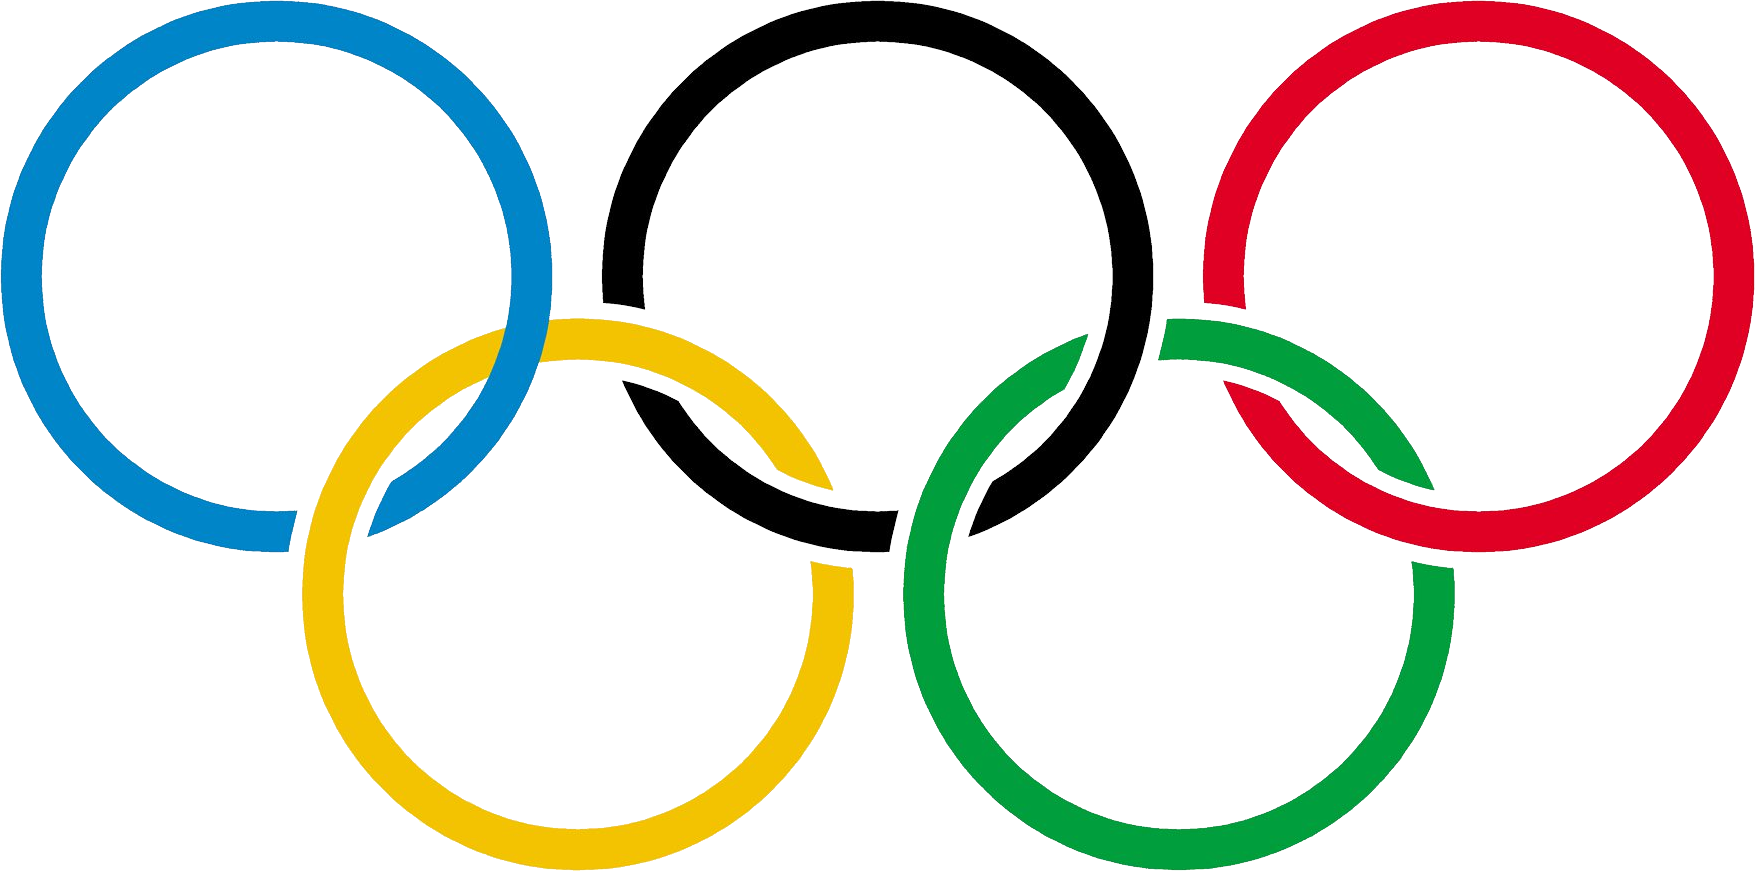 Olympic clipart academic. Rings png 